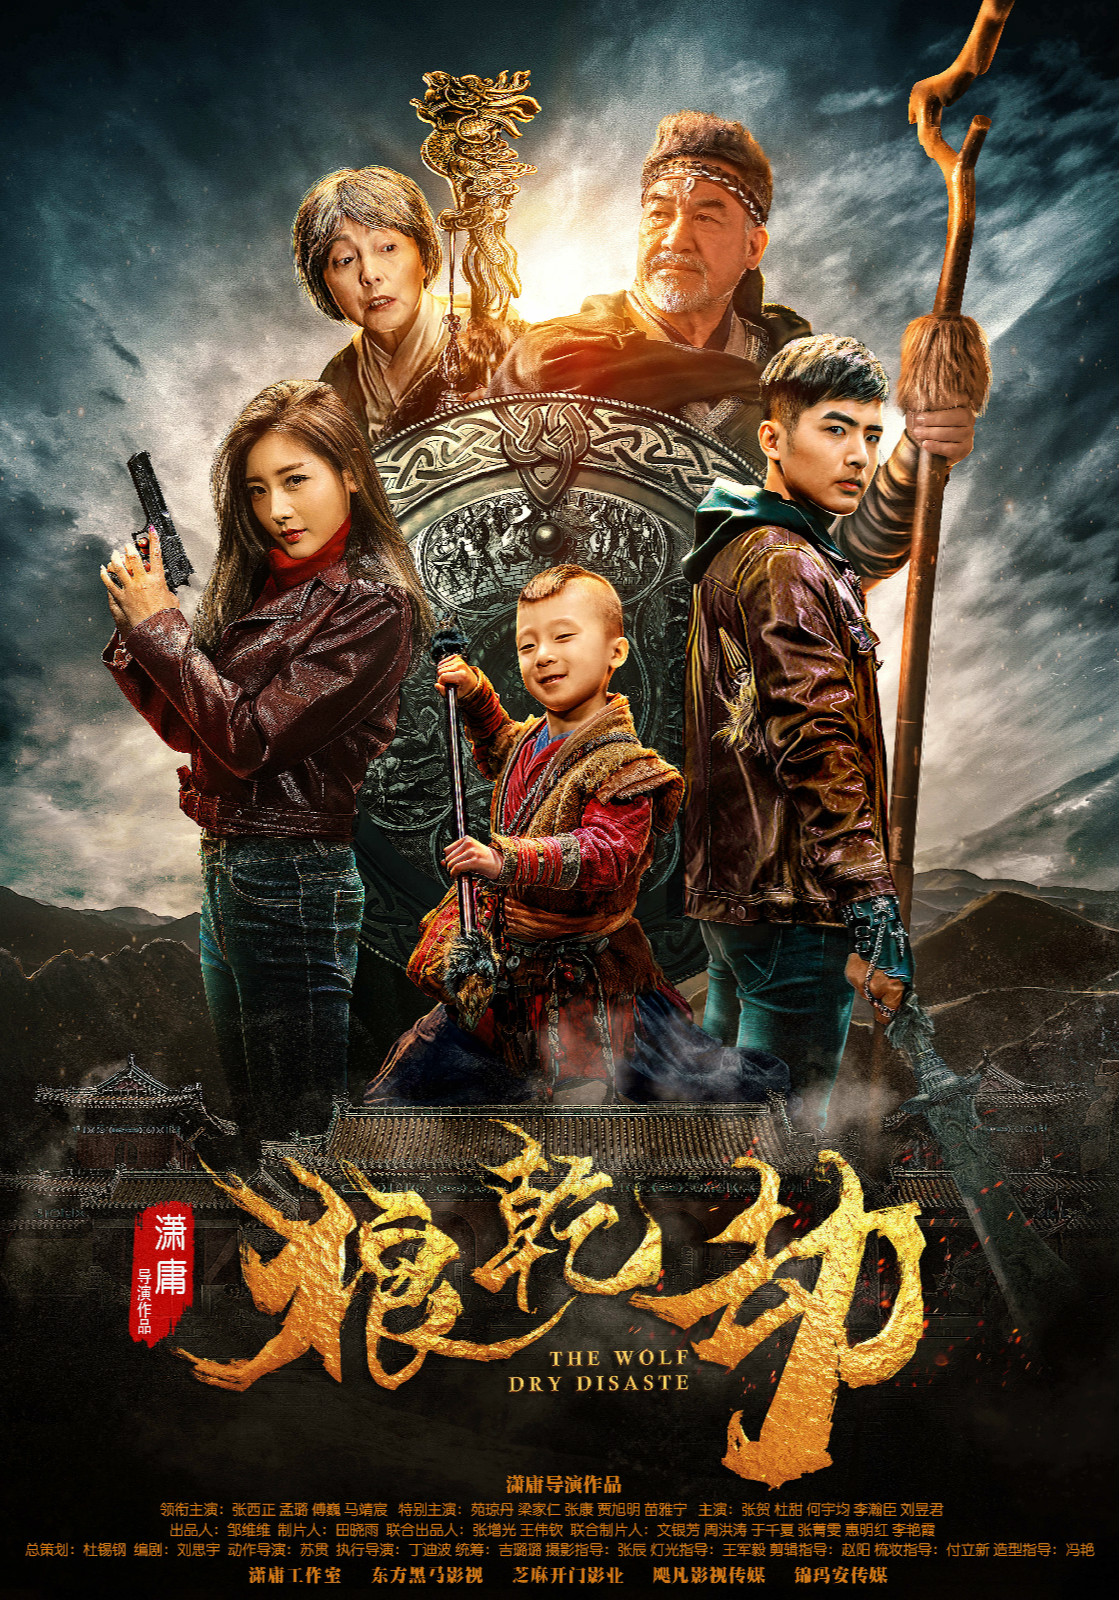 Banner Phim Lang Càn Kiếp (The Wolf Dry Disaster)